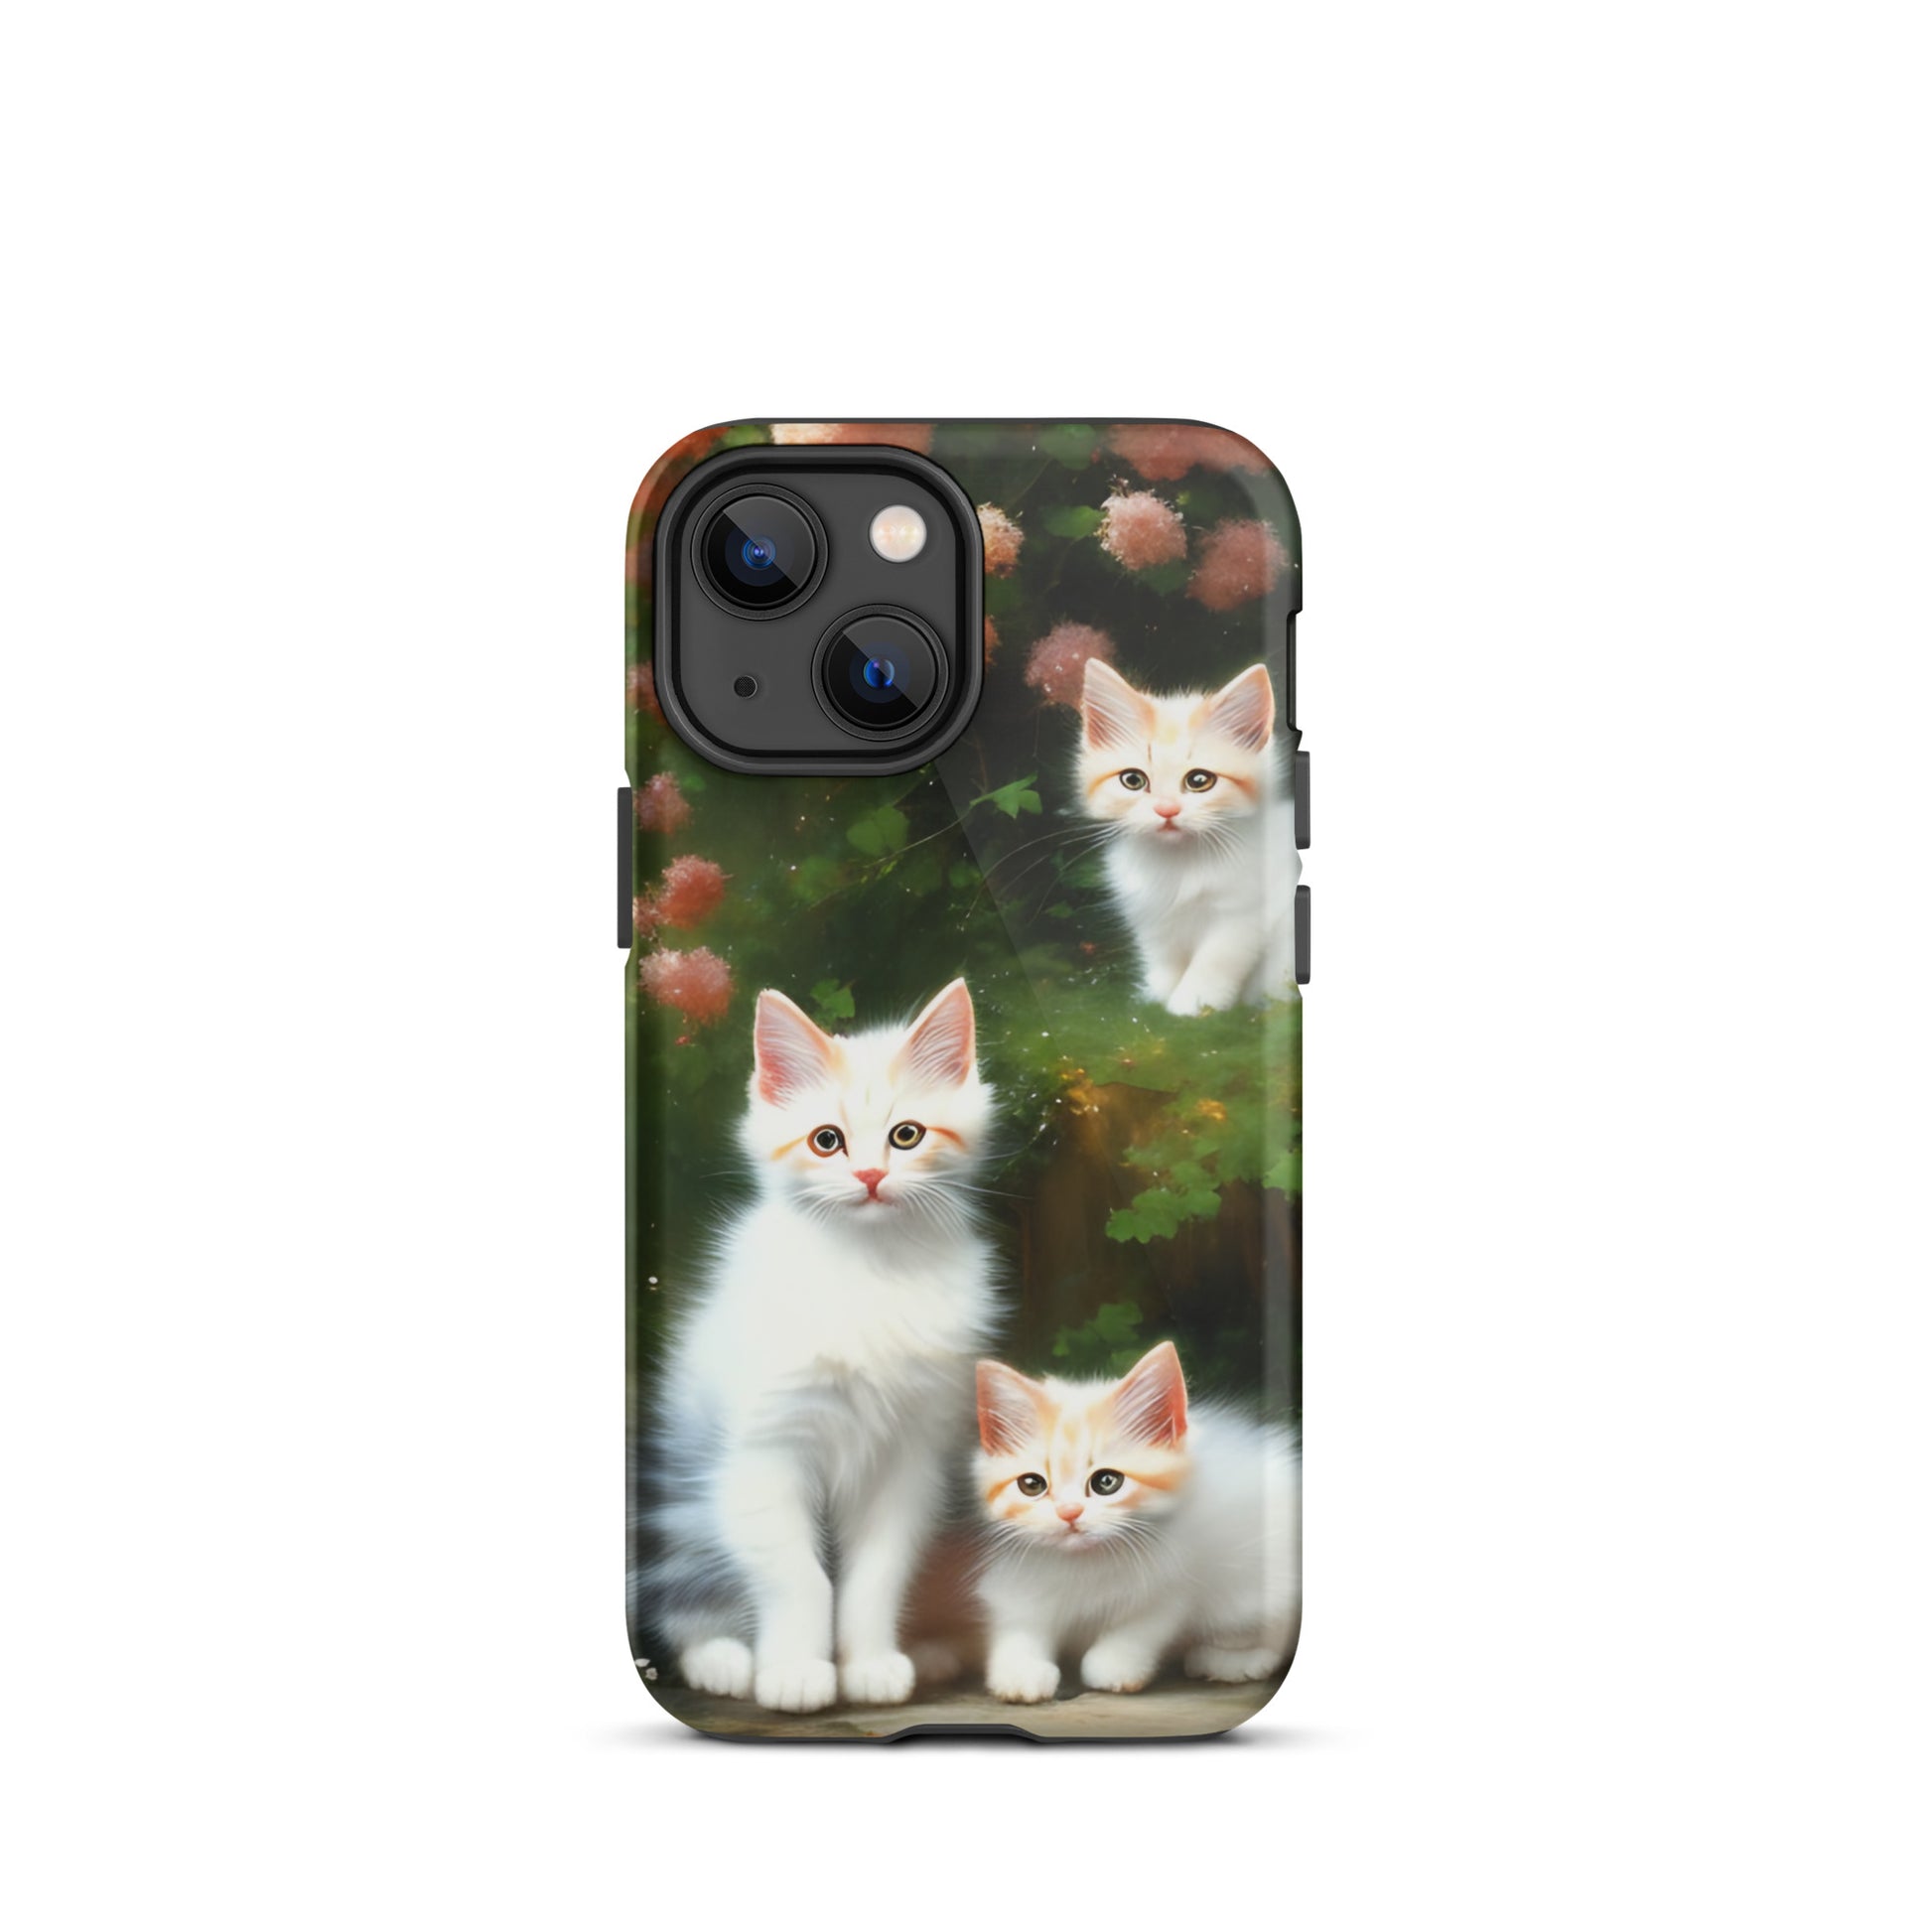 A picture of a iphone tough case with 3 fluffy white and orange kittens and peach colored flowers in the background - glossy-iphone-13-mini-front